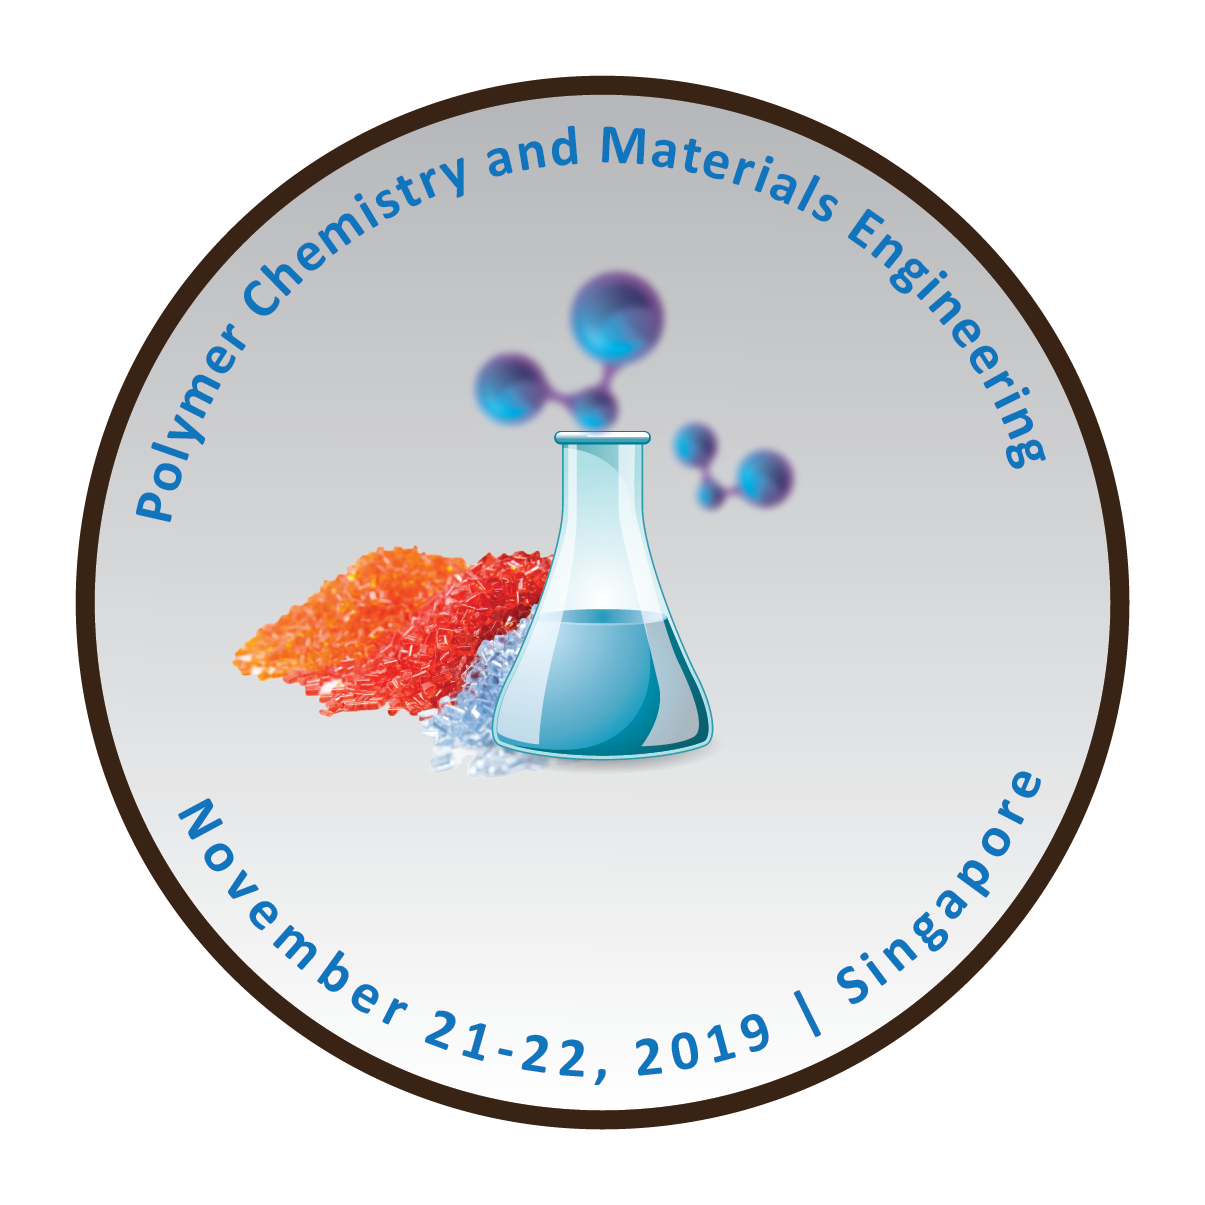 3rd International conference and Exhibition on Polymer chemistry and Materials Engineering